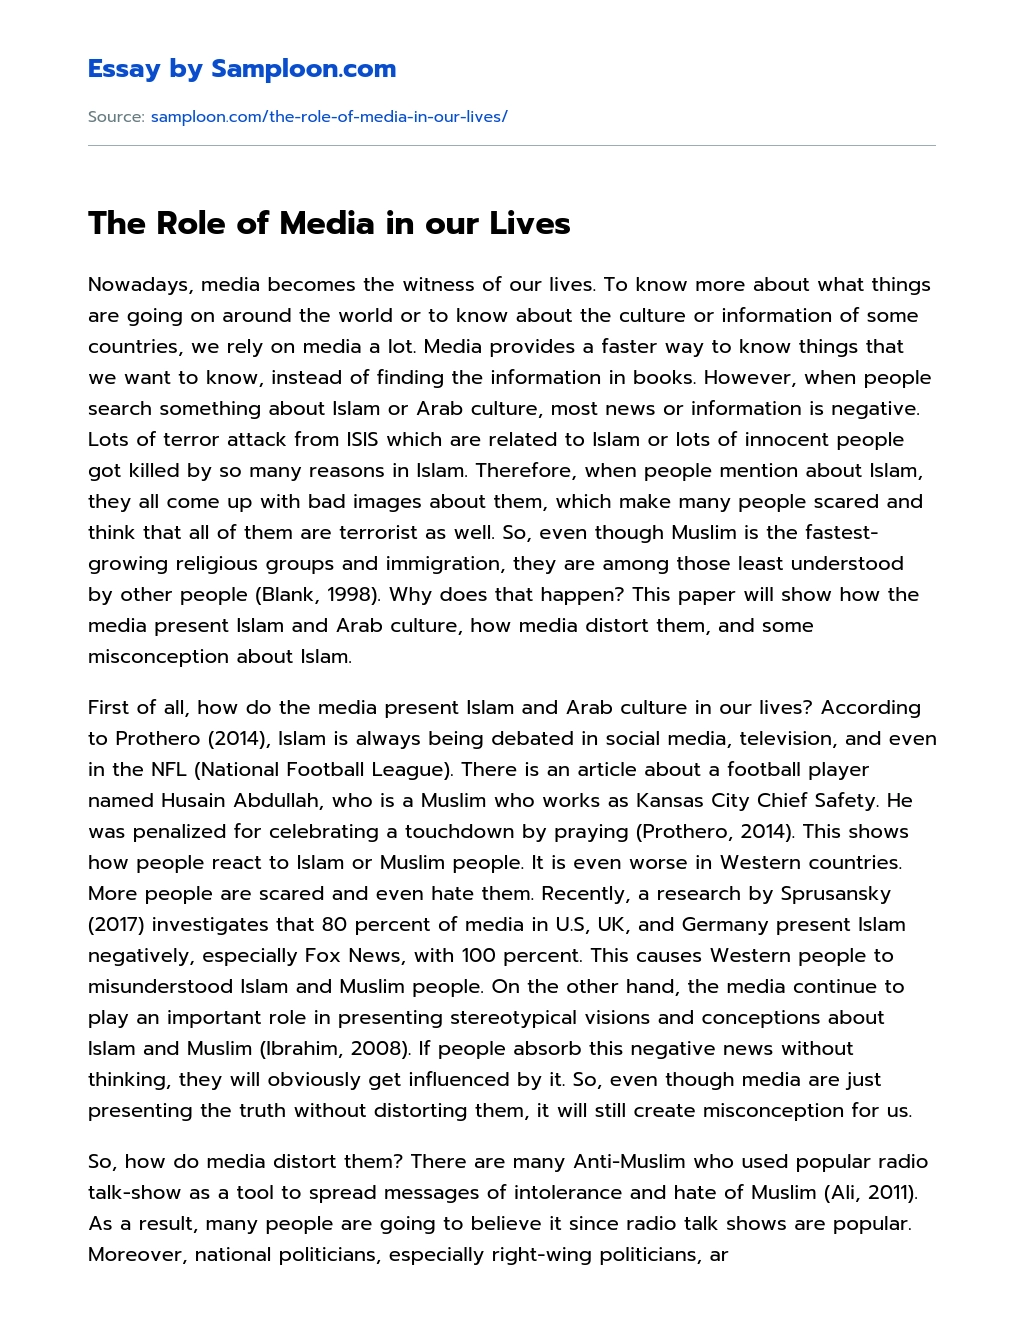 The Role of Media in our Lives essay